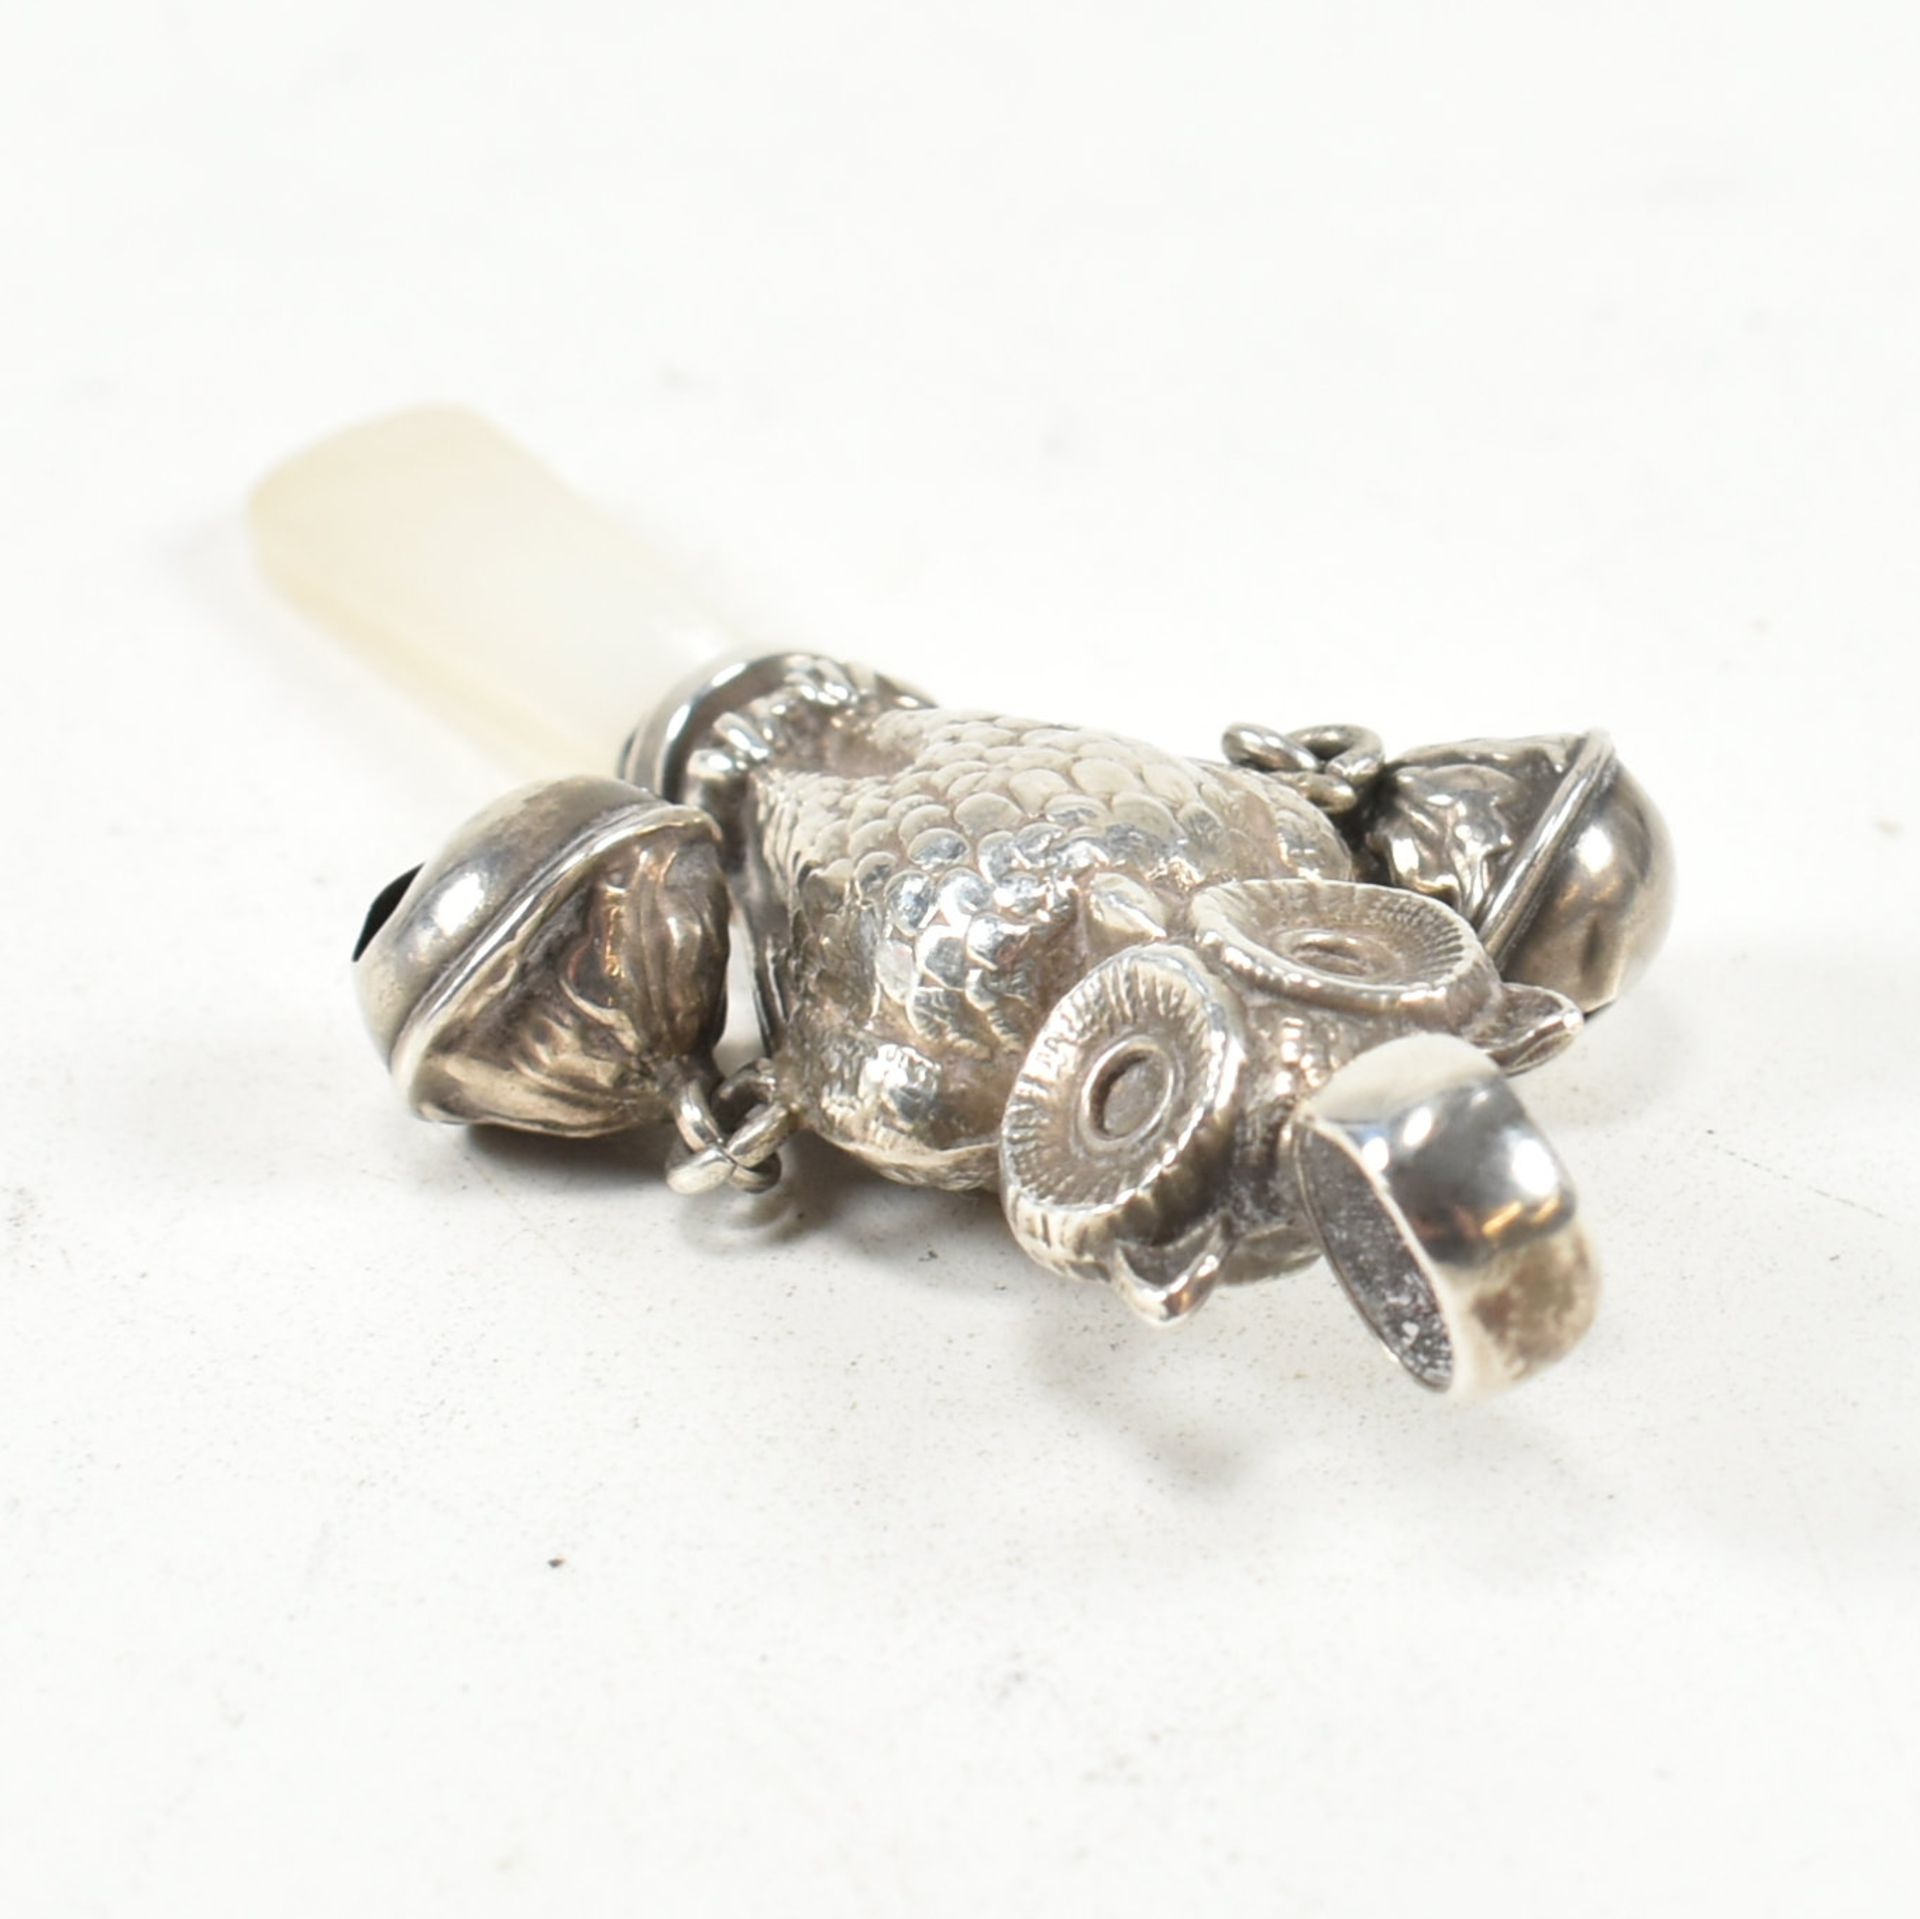 EARLY 20TH CENTURY SILVER OWL RATTLE & MOTHER OF PEARL TEETHER - Image 3 of 4